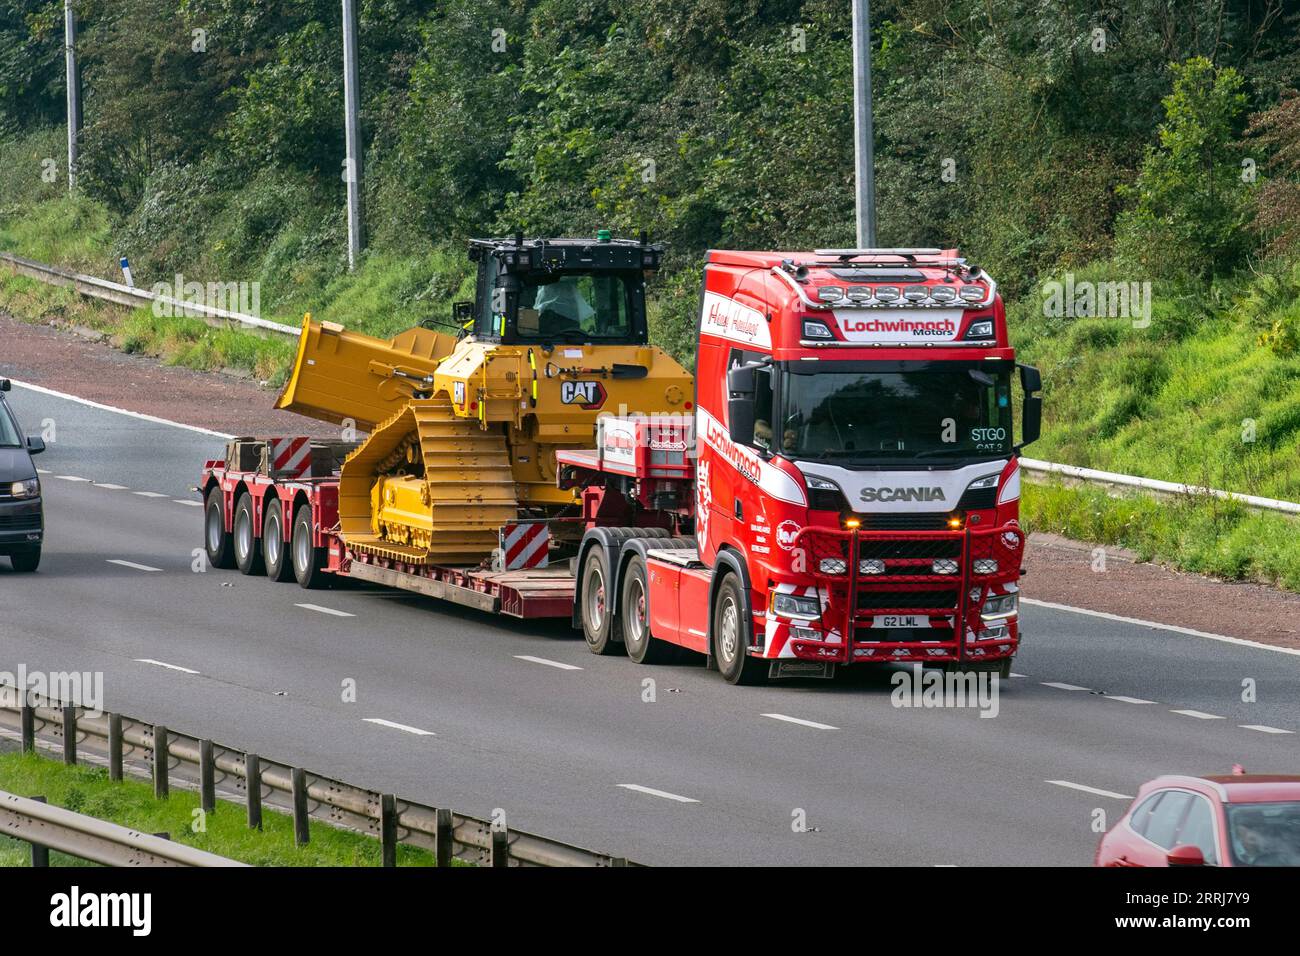 Lochwinnoch Motors Ltd. Heavy, Abnormal & General Haulage loads. Large Cat D9 Bulldozer tracked vehicle step-trailer with Abnormal loads travelling on 2018 Scania the M6 motorway in Greater Manchester, UK Stock Photo